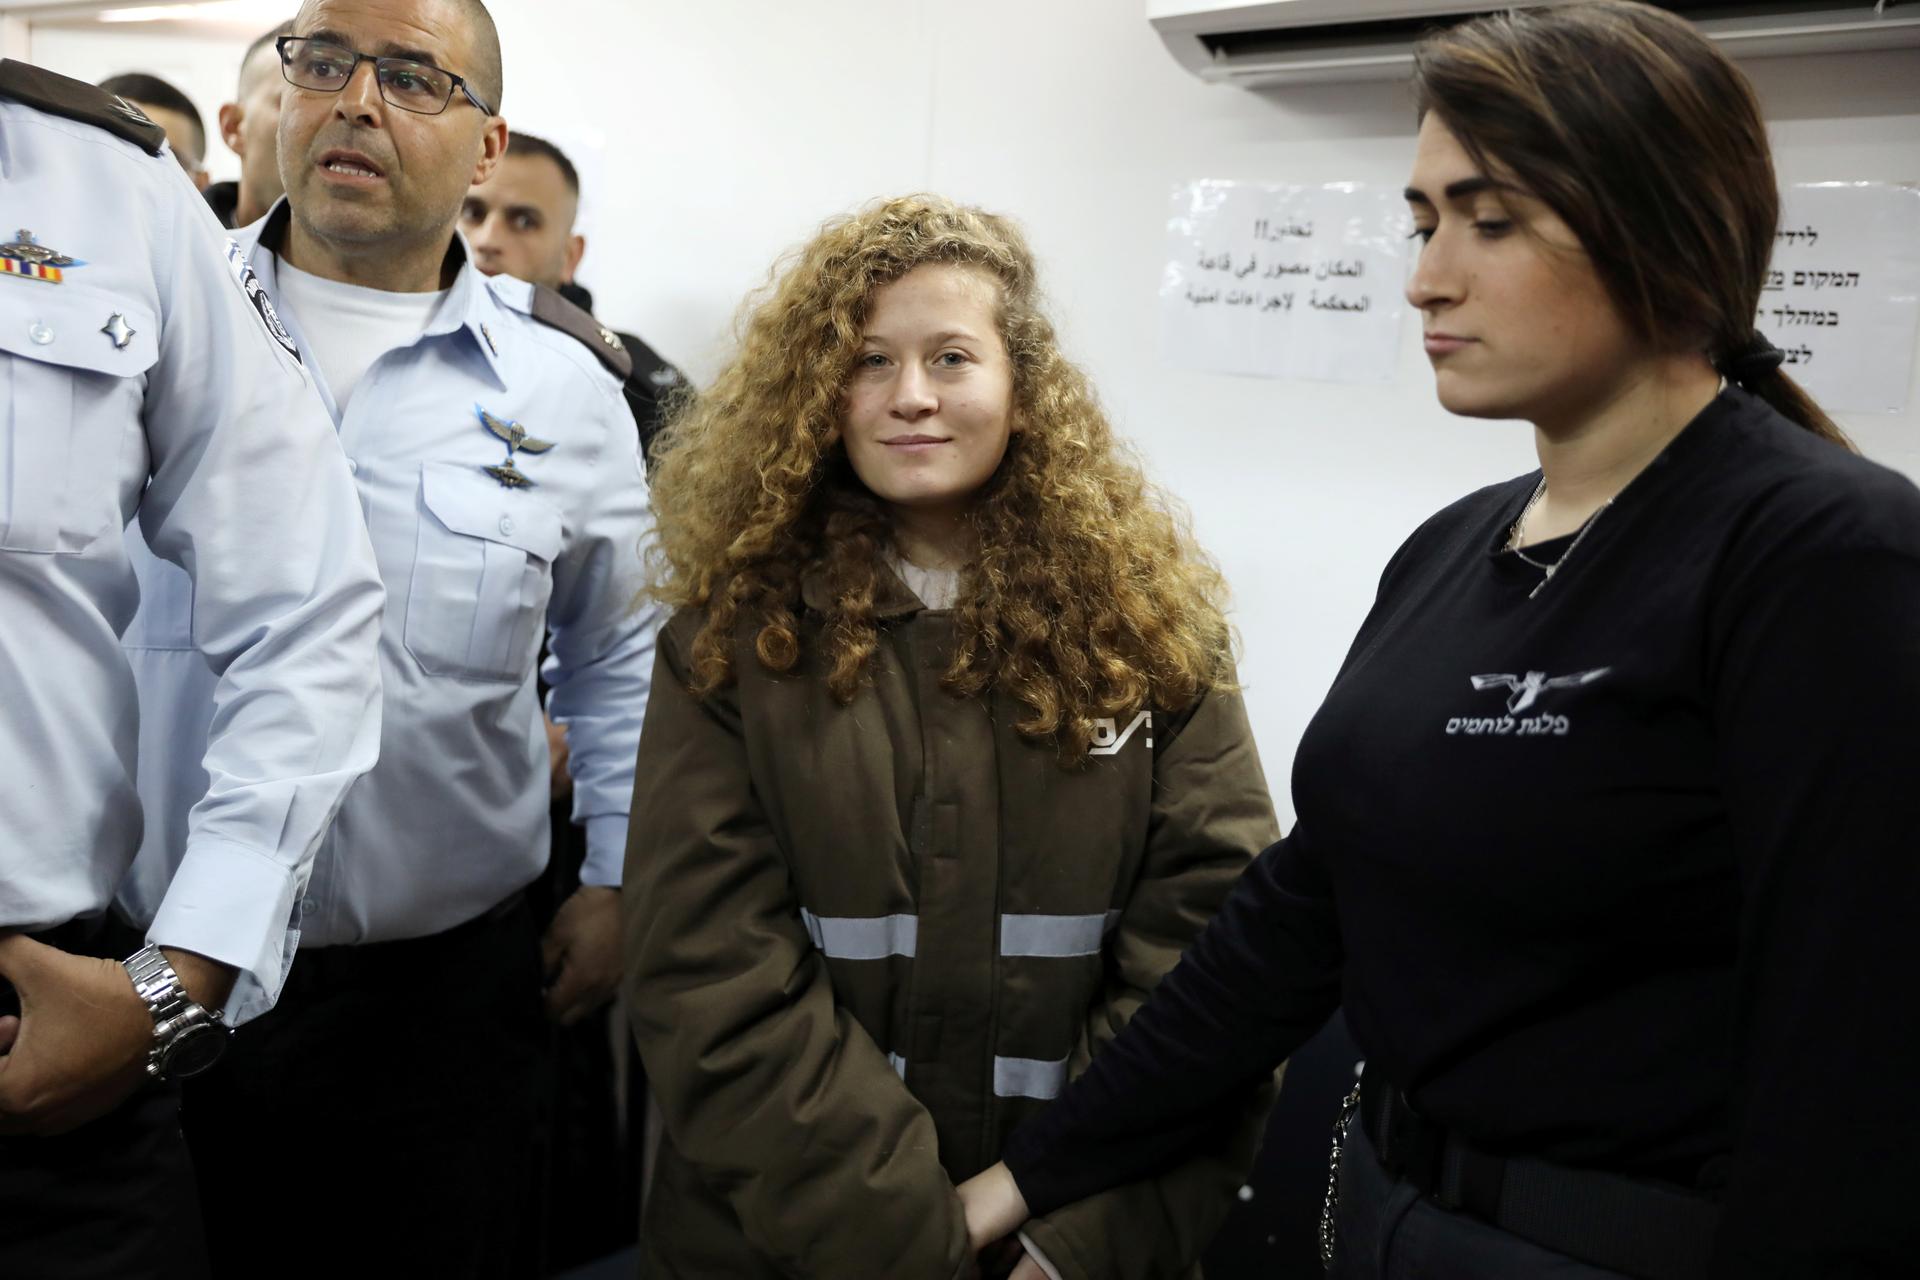 Palestinian teen Ahed Tamimi enters a military courtroom escorted by Israeli security personnel at Ofer Prison, near the West Bank city of Ramallah, Jan. 15, 2018. 